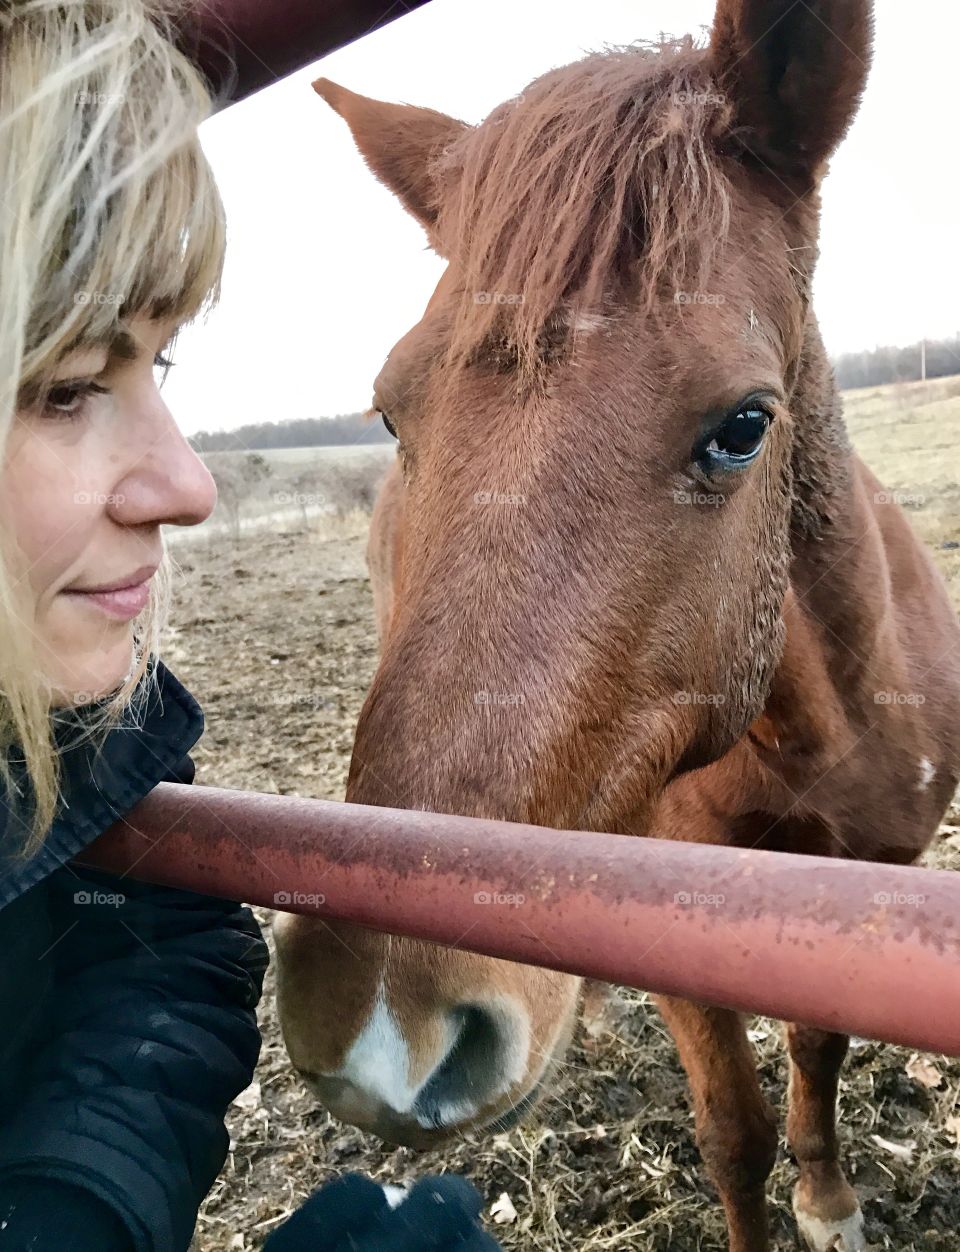 Winter stories, winter, stories, caring, horse, gate, woman, cold, hair, blond, windy, windy, rust, frozen, brown, grass, fur, eyes, ears, mammal, human, beautiful, profile, side view, day, daylight, overcast, gray